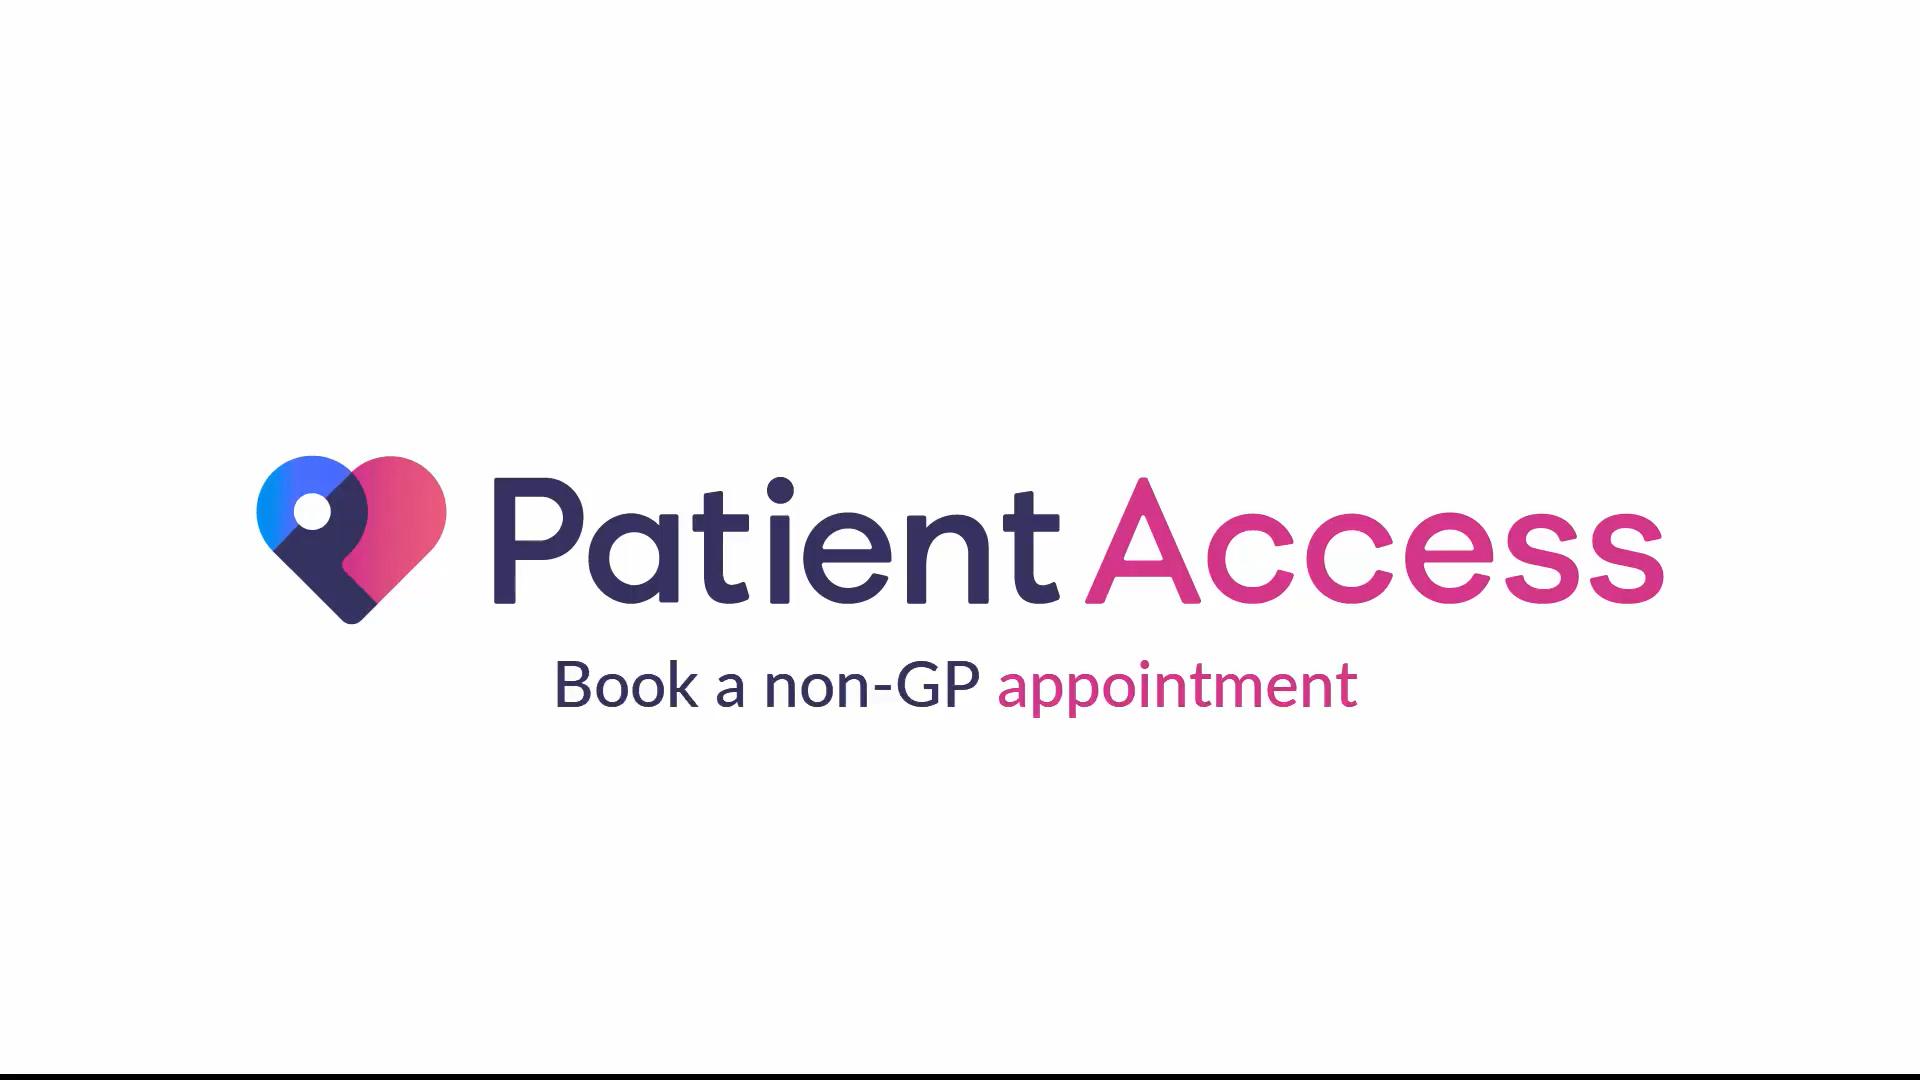 Booking non-GP appointments